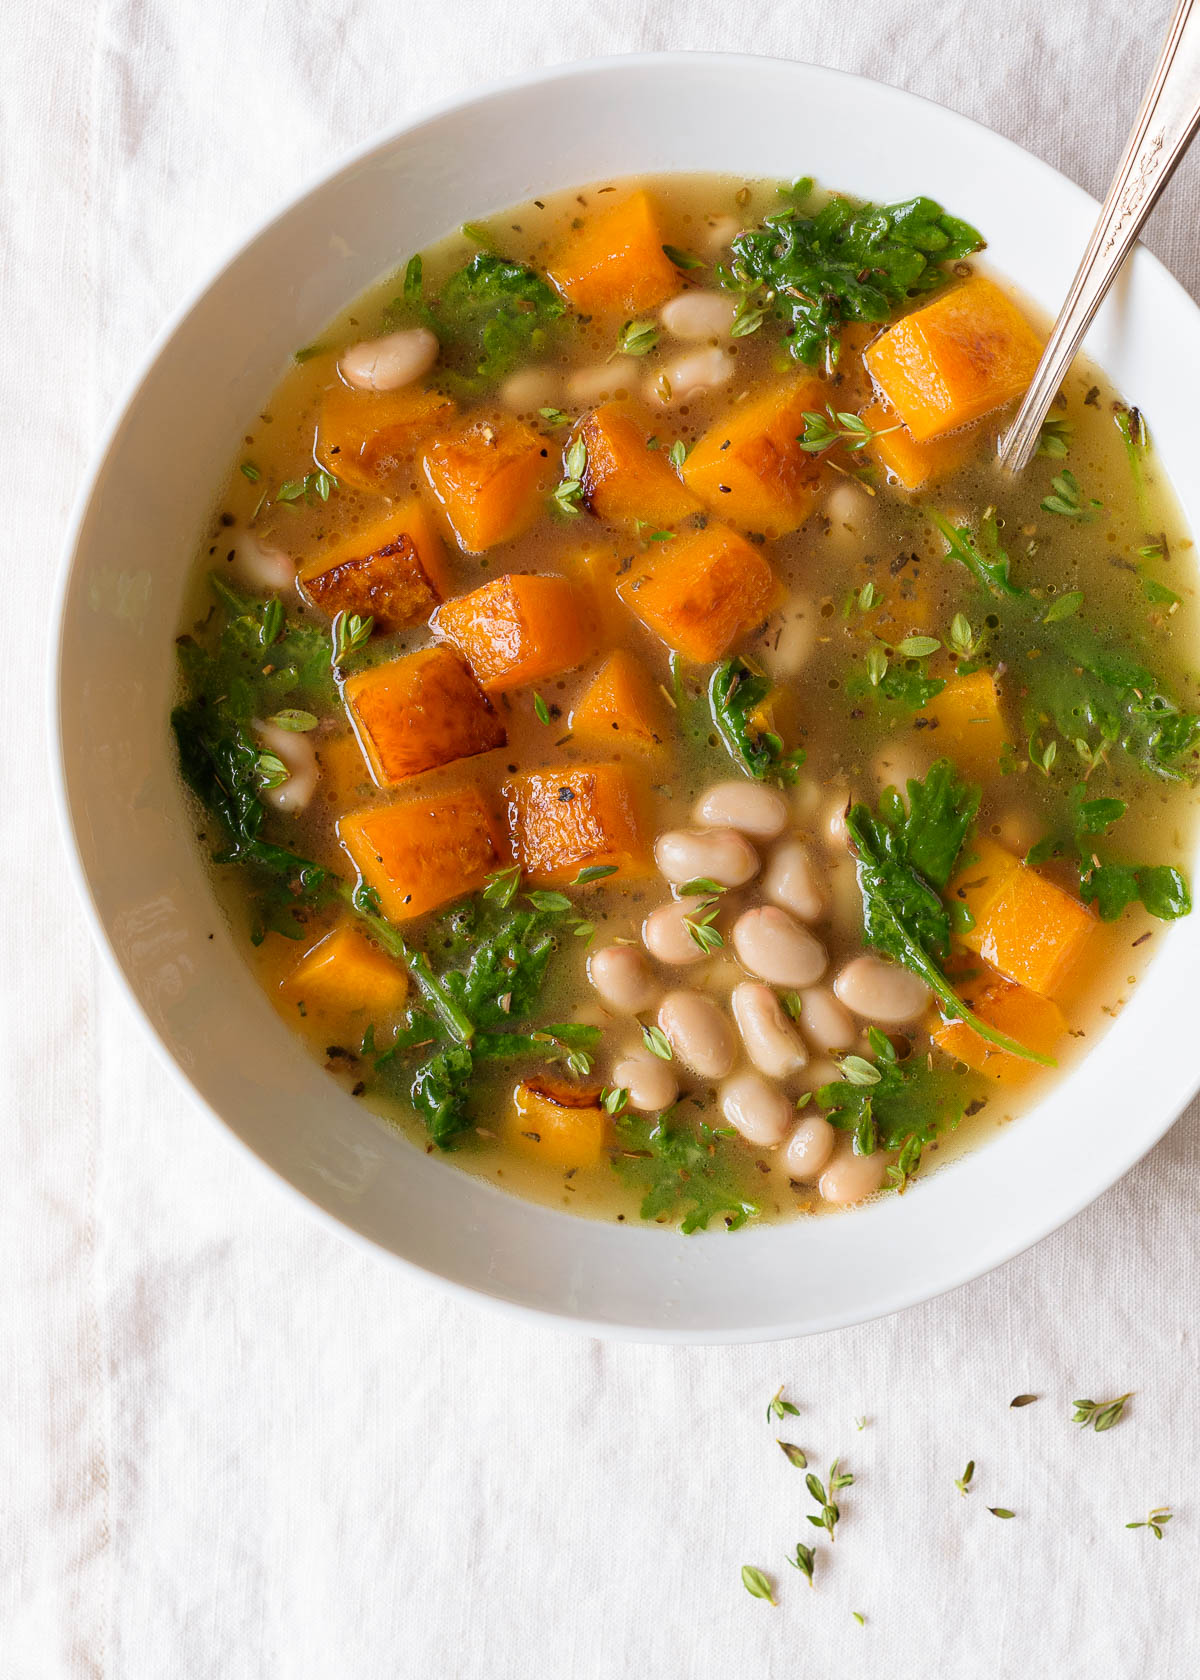 Tuscan bean soup with squash